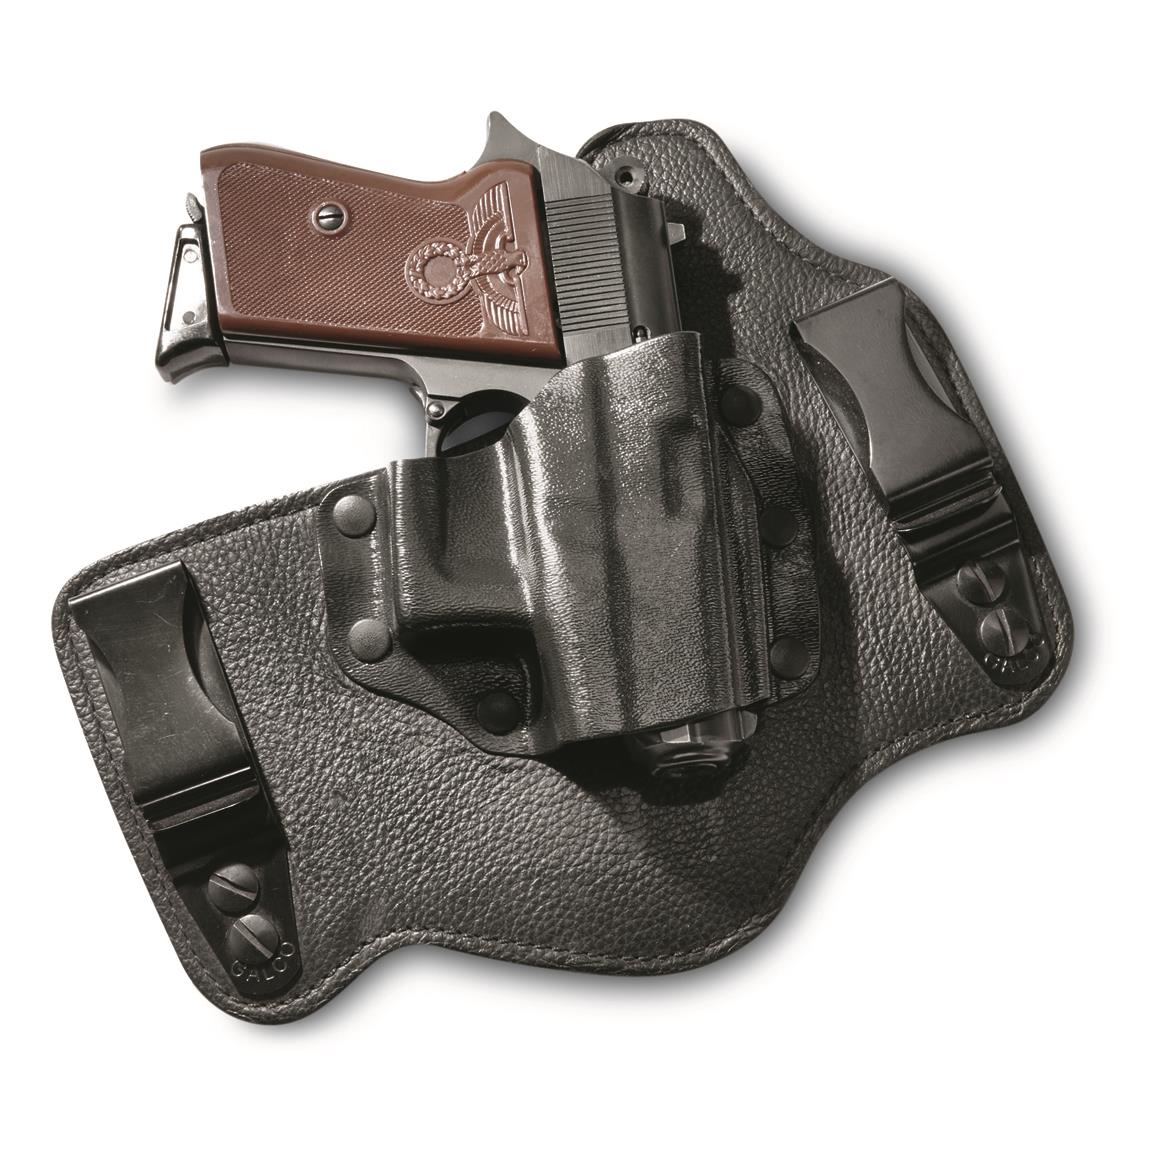 WSB-15 Protech Hand Gun Holster fits Springfield Armory 1911A1 With 5" Barrel 